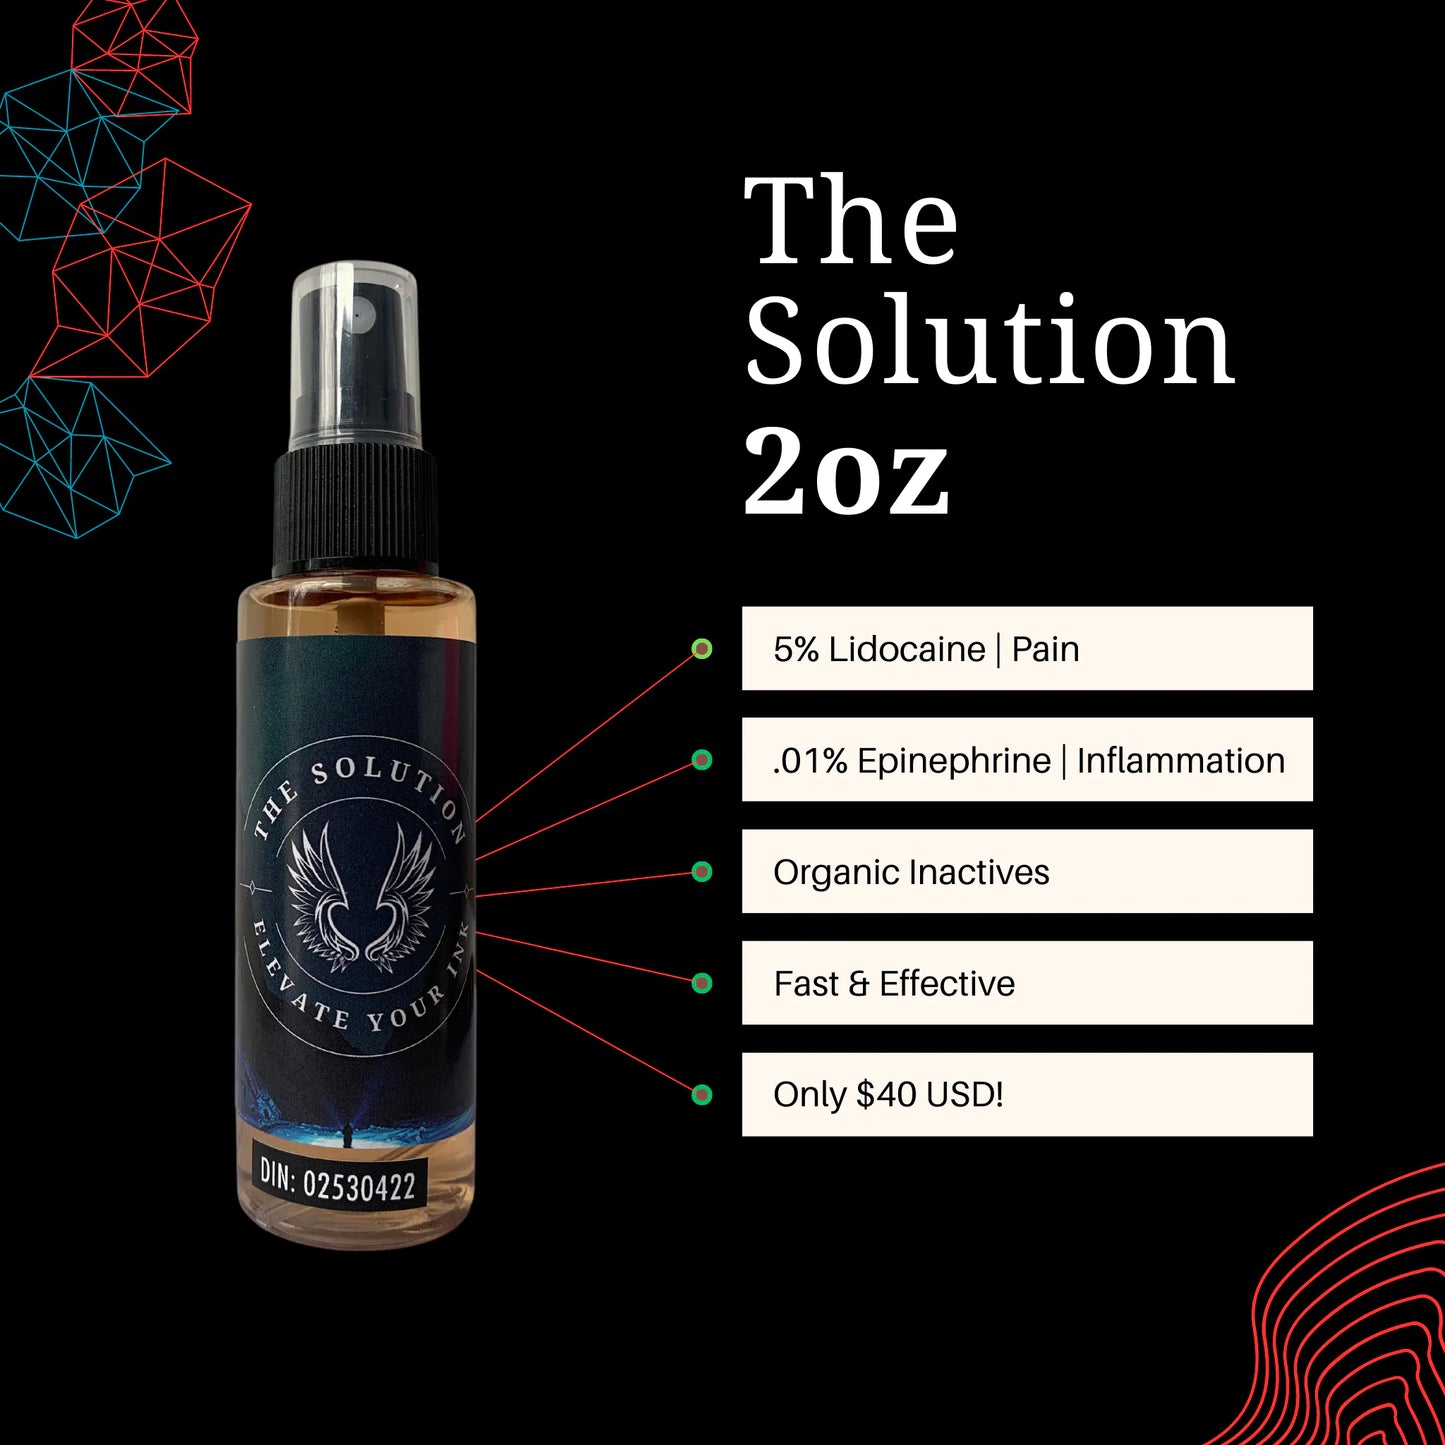 The Solution 2oz